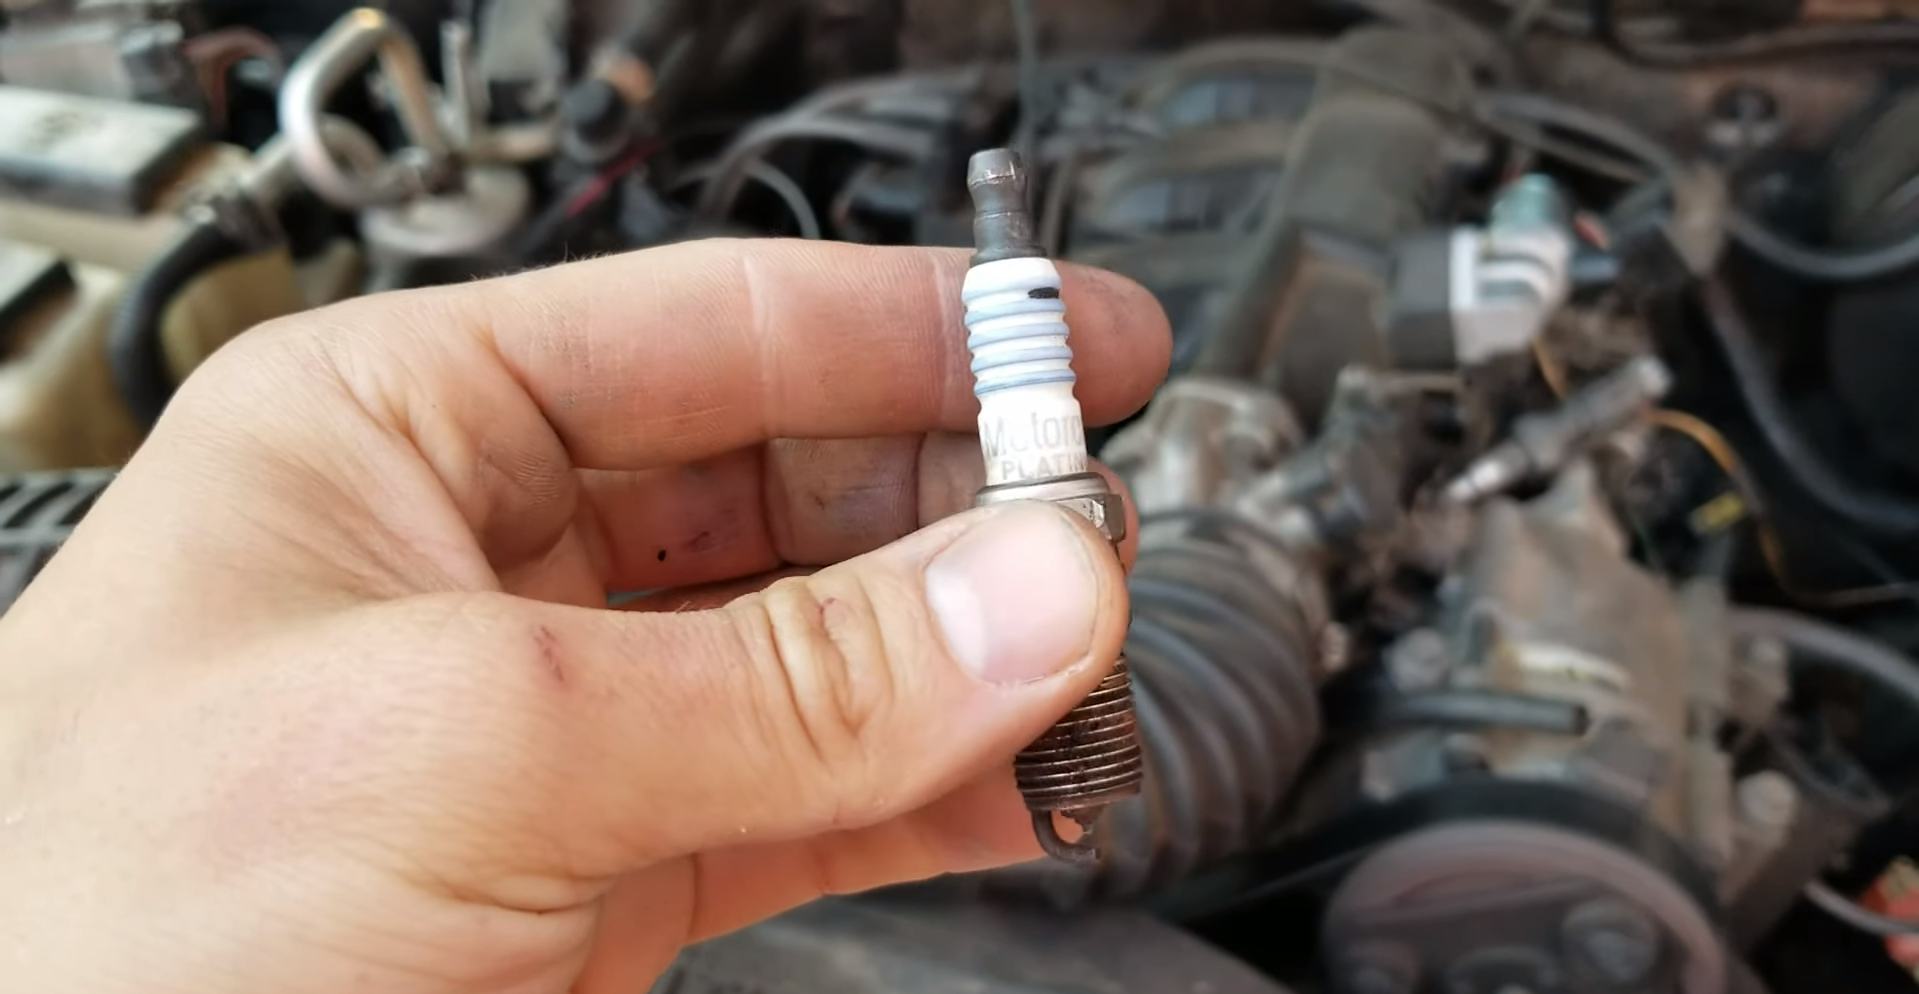 Are all spark plugs standard size?